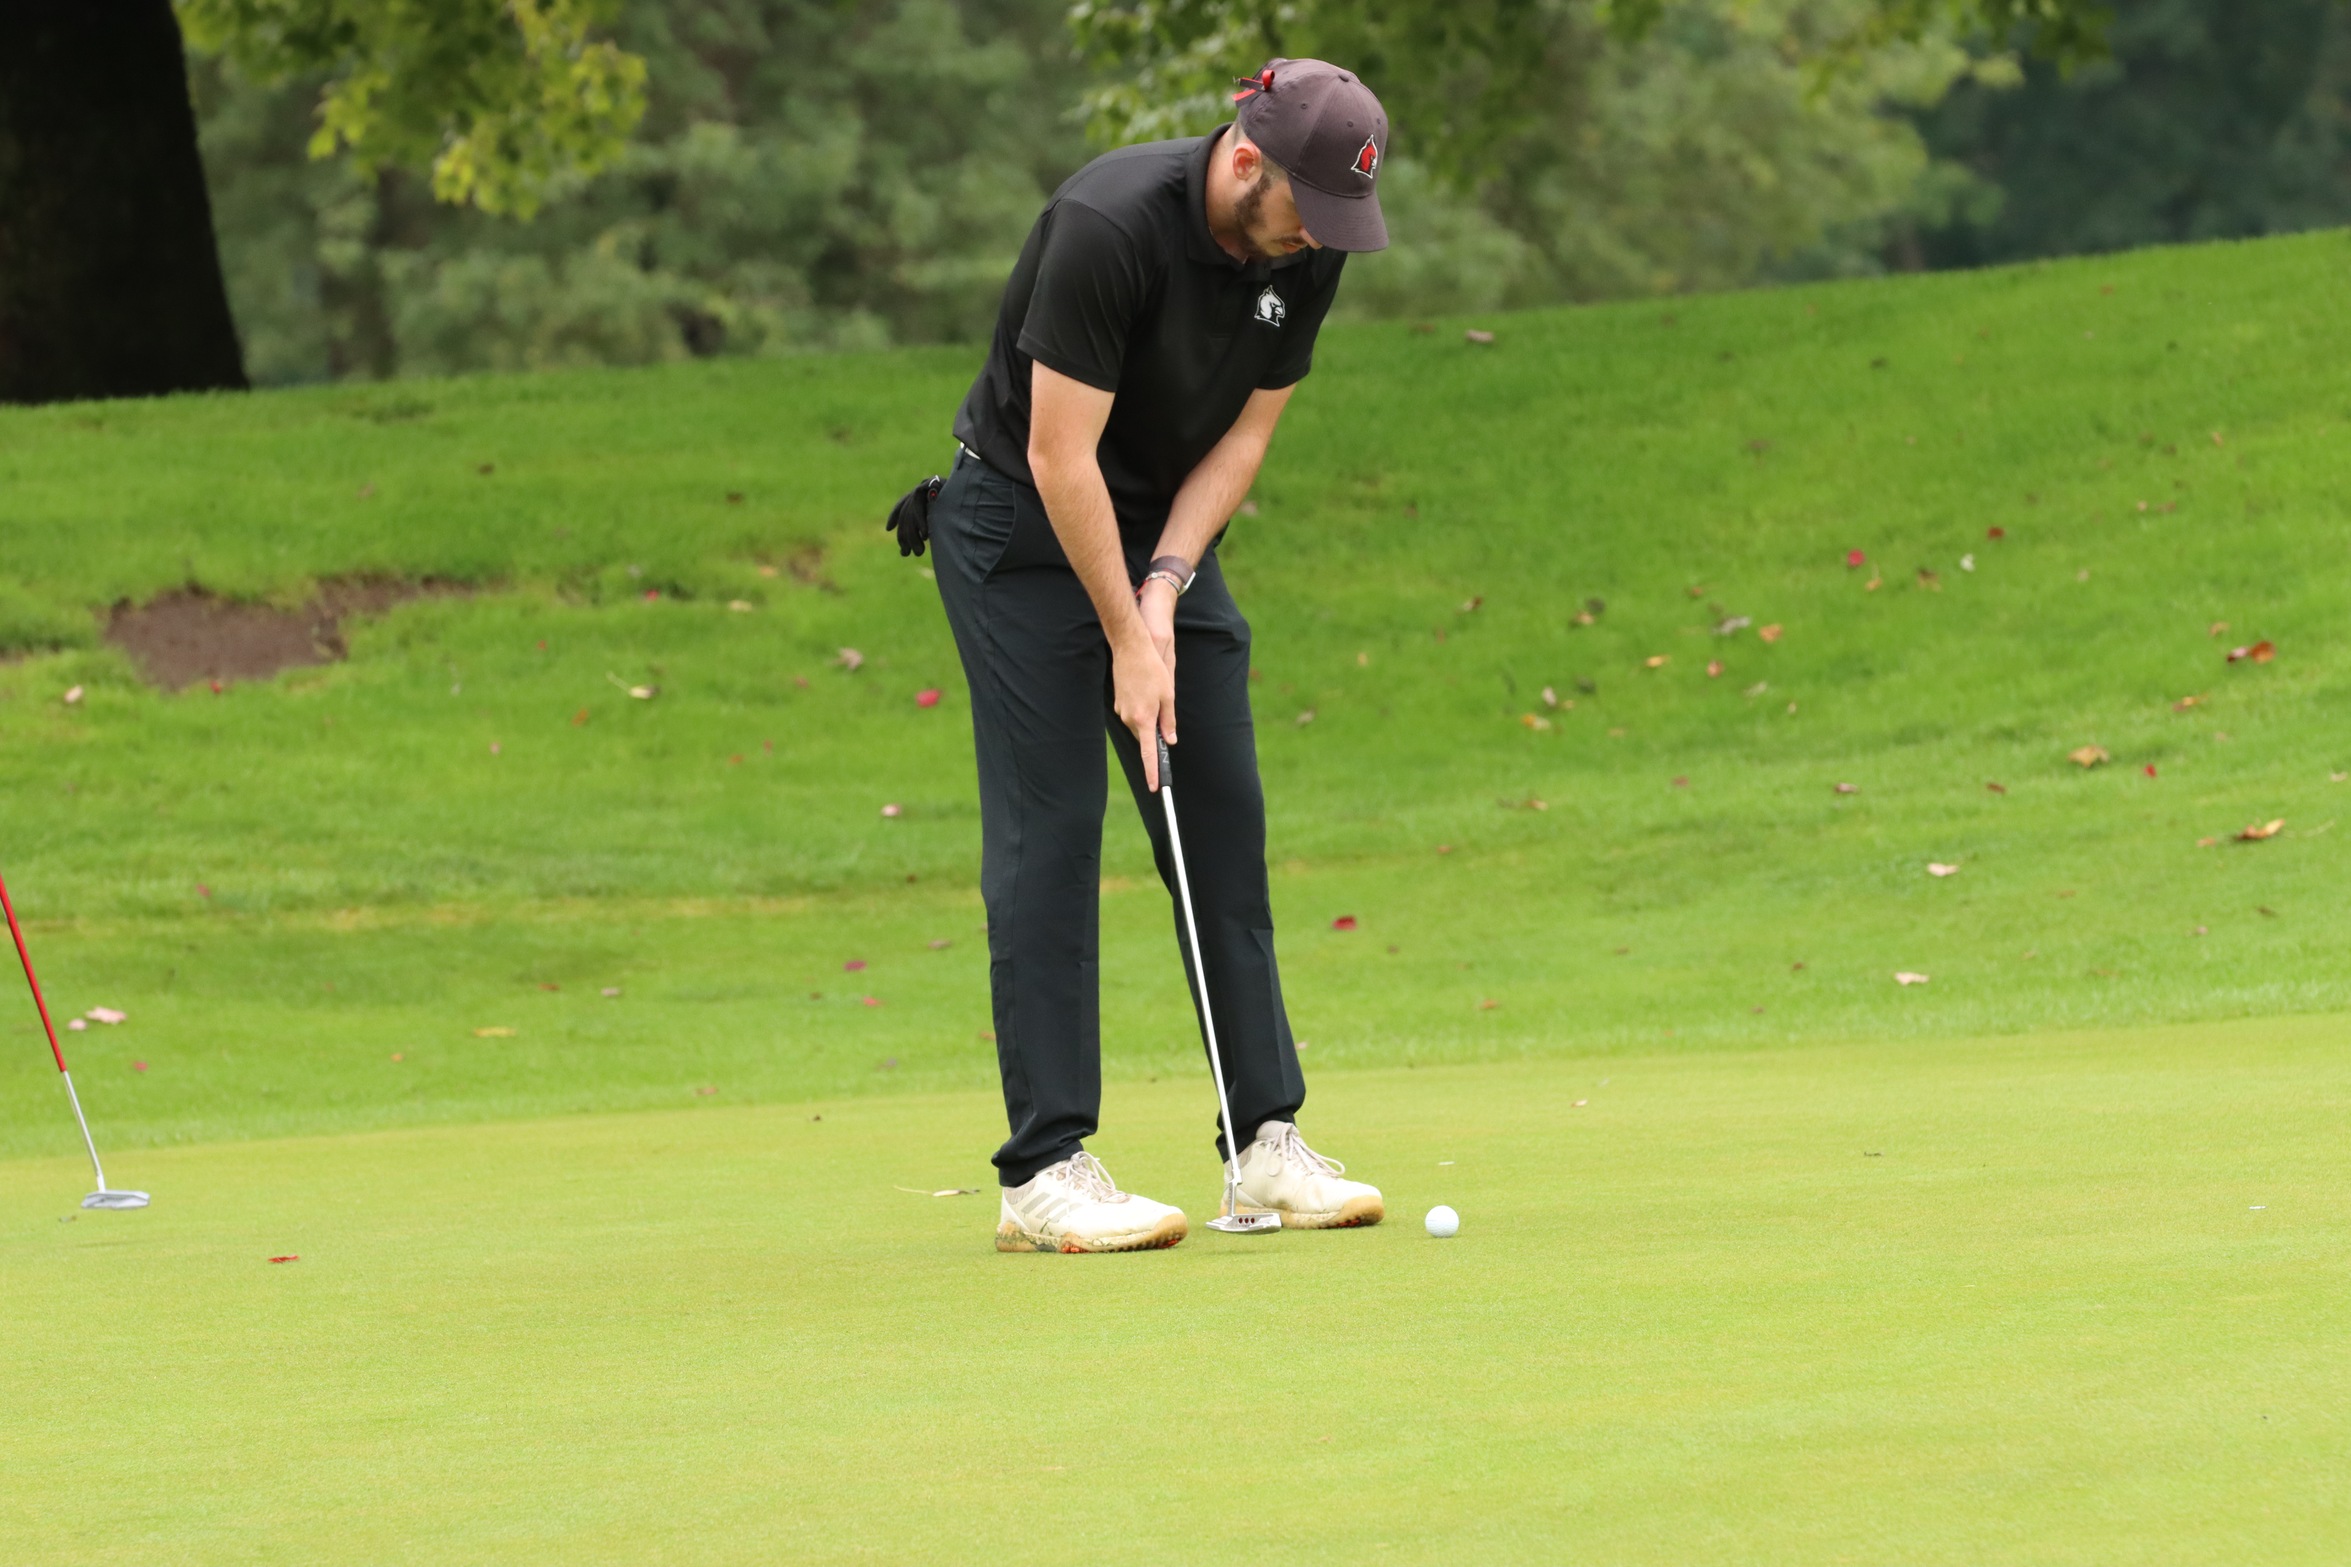 Men's Golf finishes in 10th at Battle of the Brae